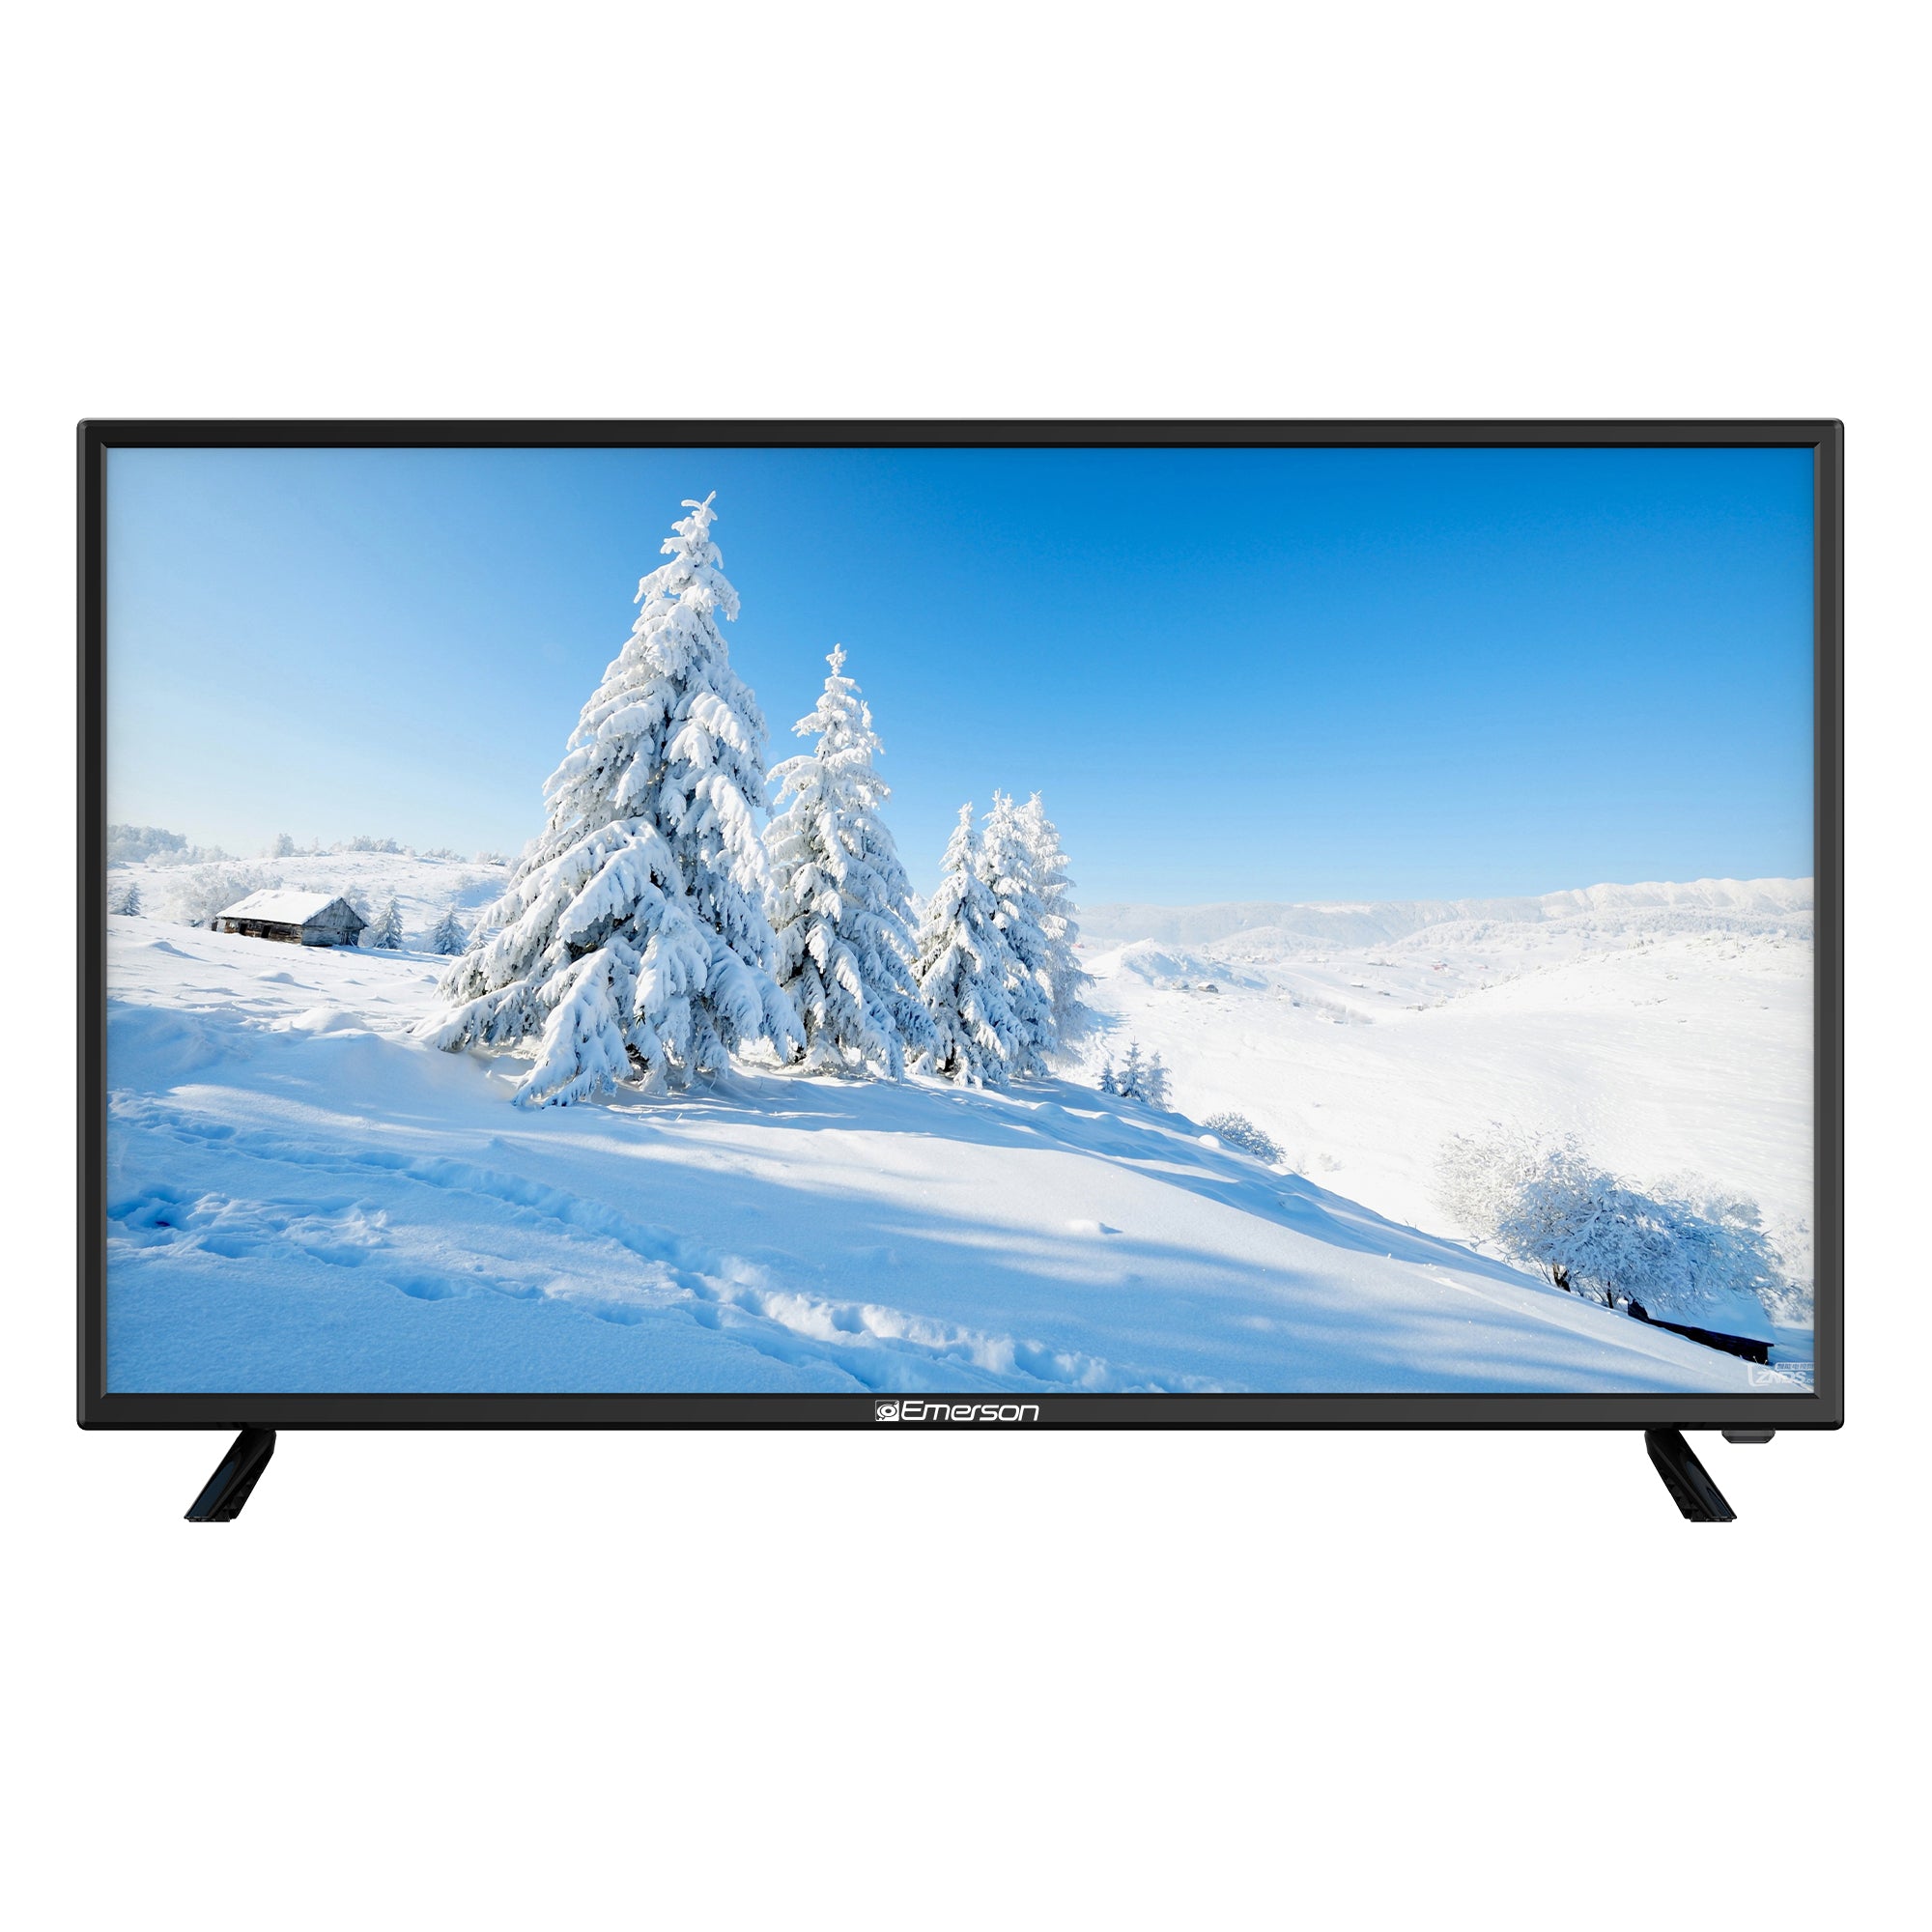 40" Class HD LED TV  with DVD Player